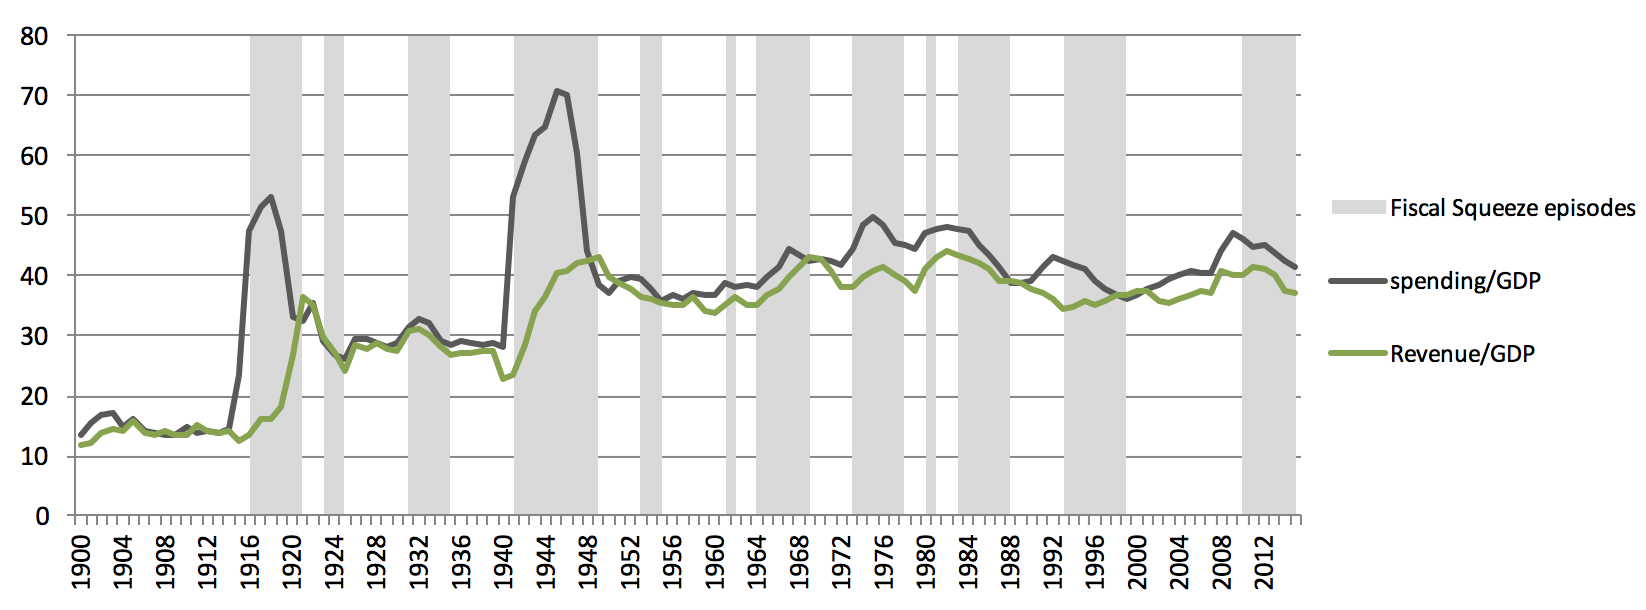 Figure 1: UK Government Spending and Revenue as a Percentage of GDP, 1900-2015